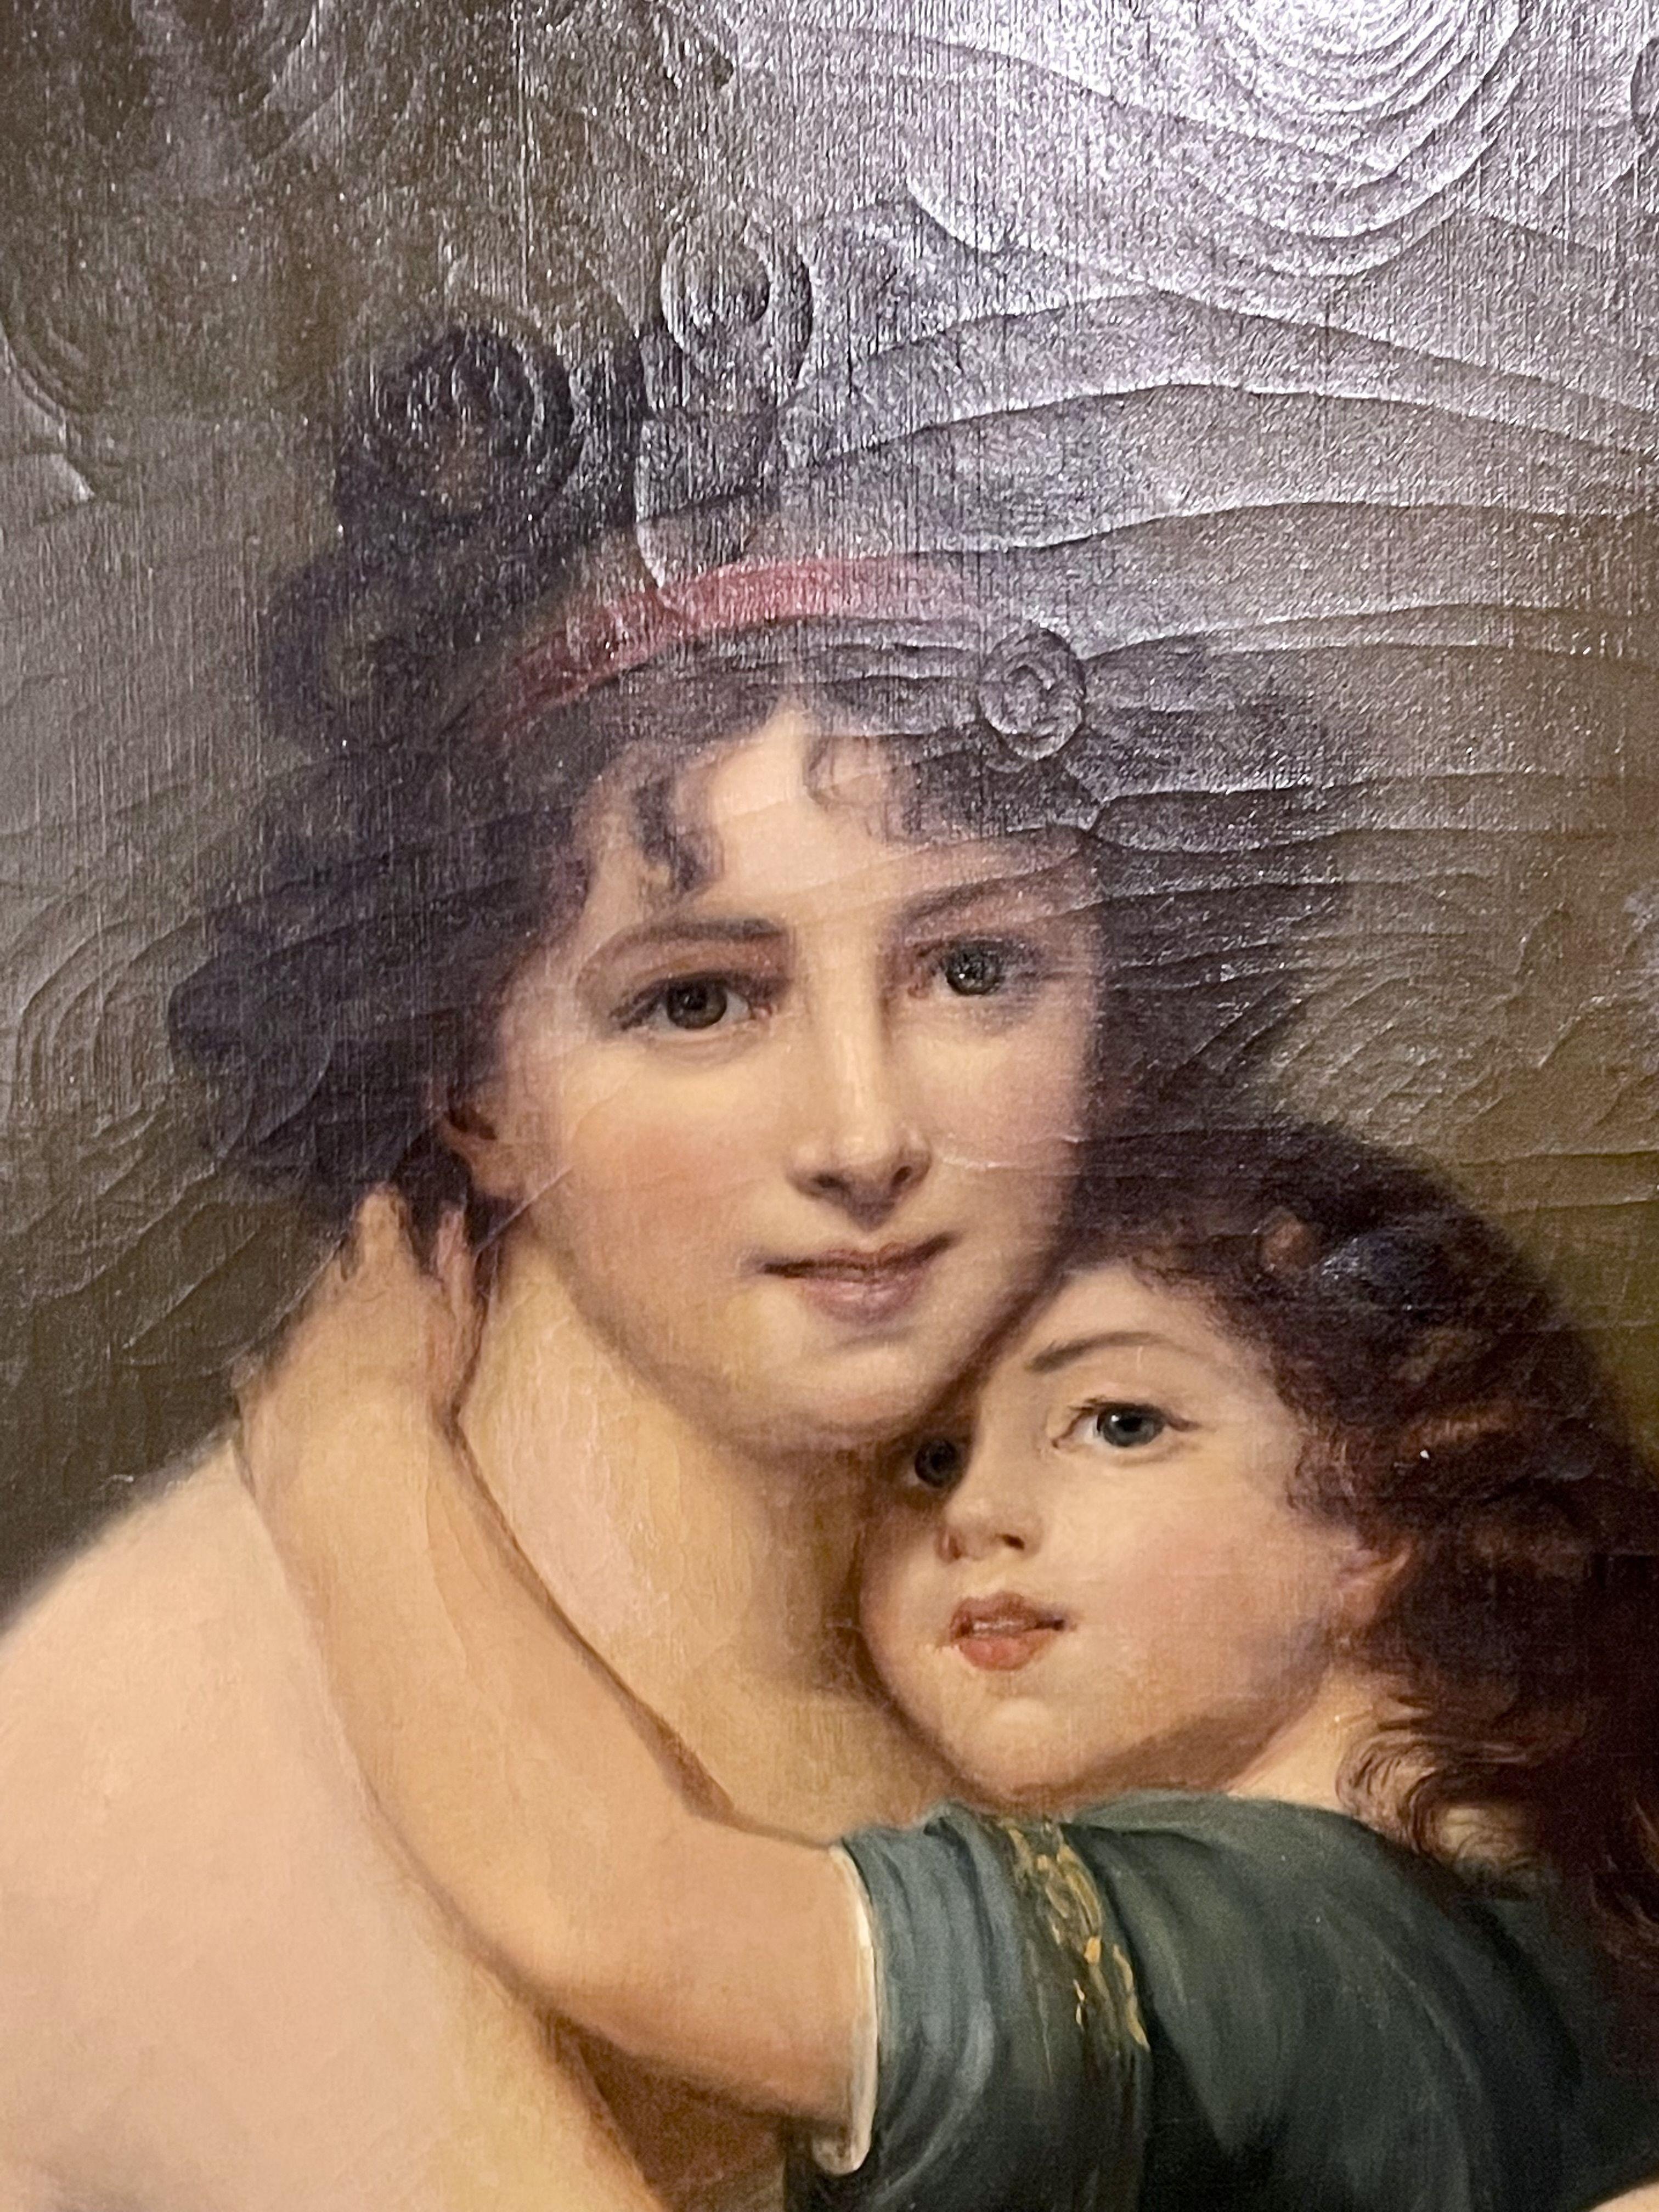 self-portrait with her daughter